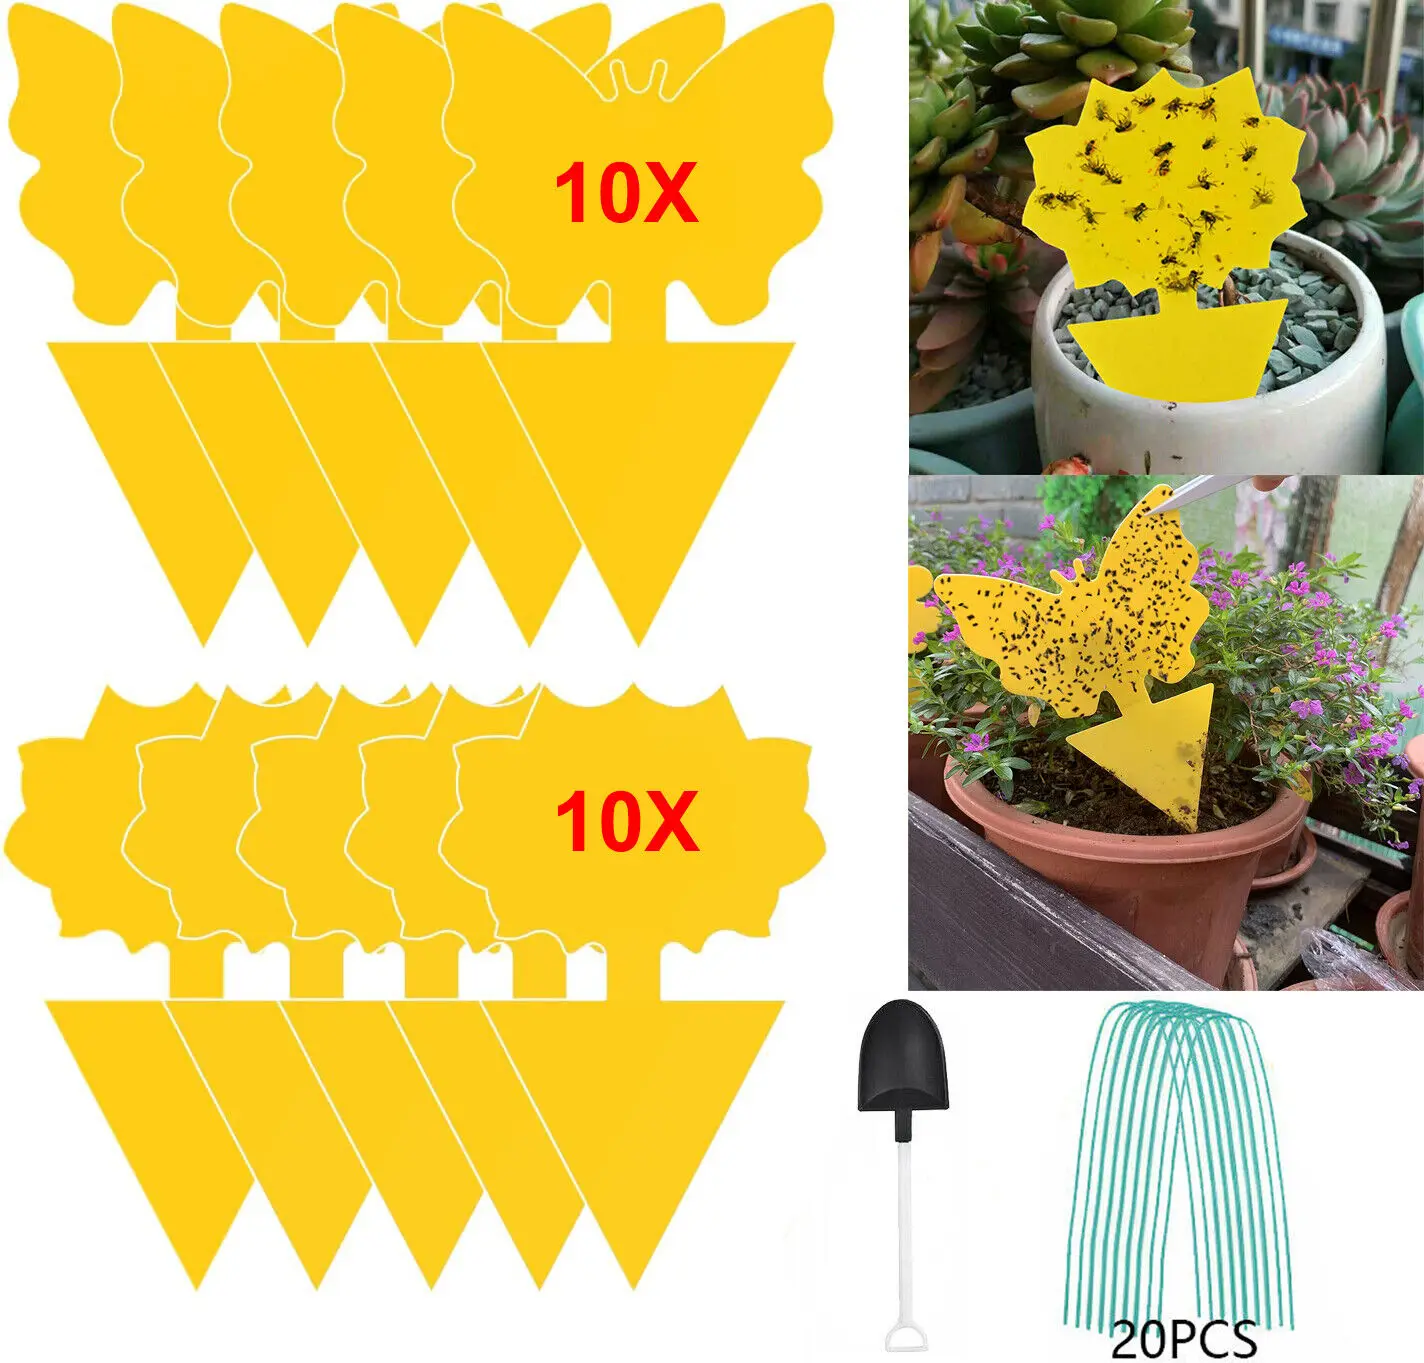 41Pc Yellow Double-sided Strong Flycatcher Sticker Insect Aphids Catcher Bug Insect Trap Plate Pest Trap Garden Plant Protection